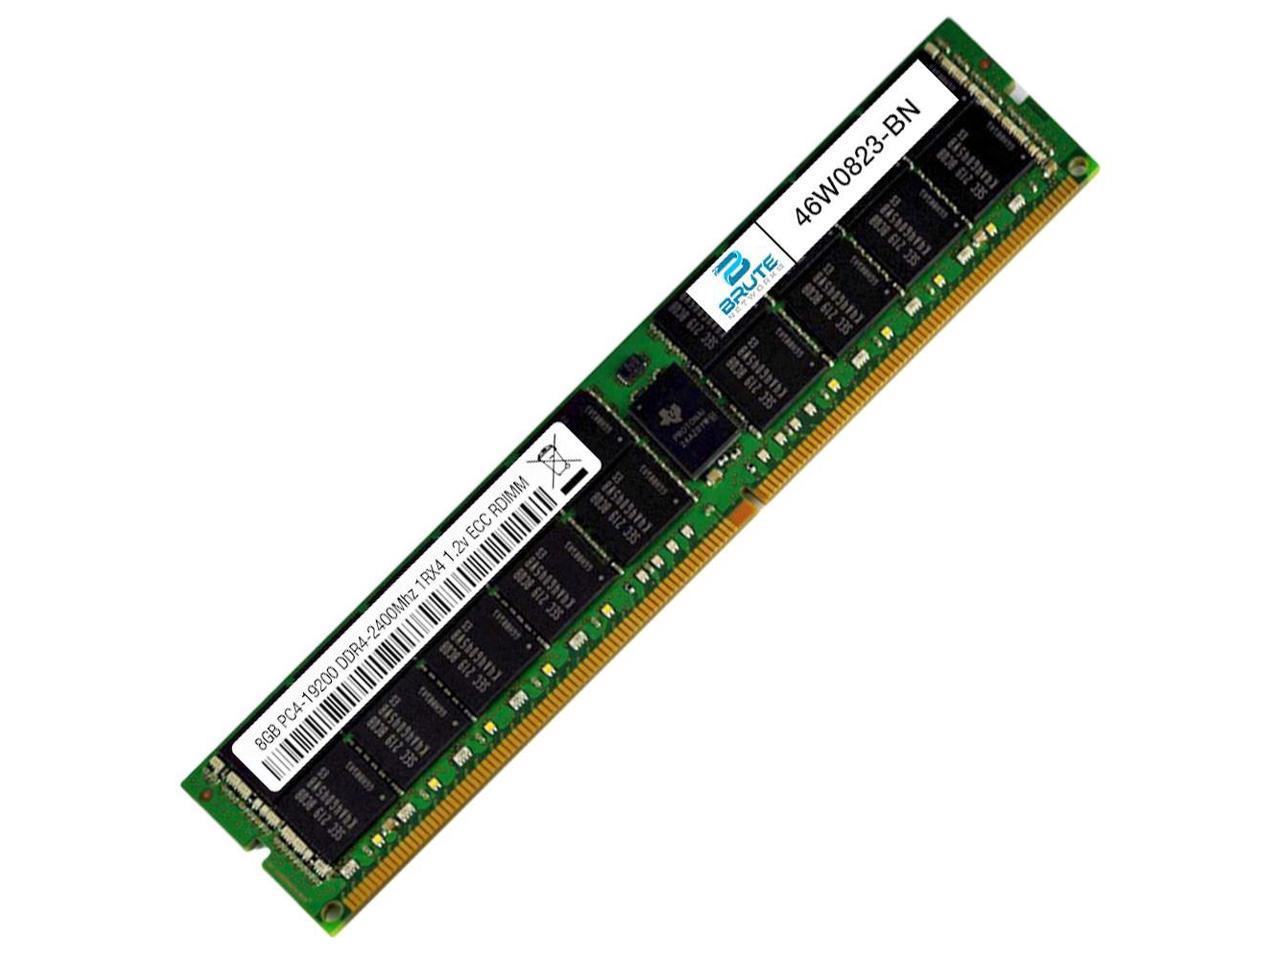 Equivalent to OEM PN # A8058238 8GB PC4-17000 DDR4-2133MHz 2Rx8 1.2v Non-ECC UDIMM Brute Networks A8058238-BN 